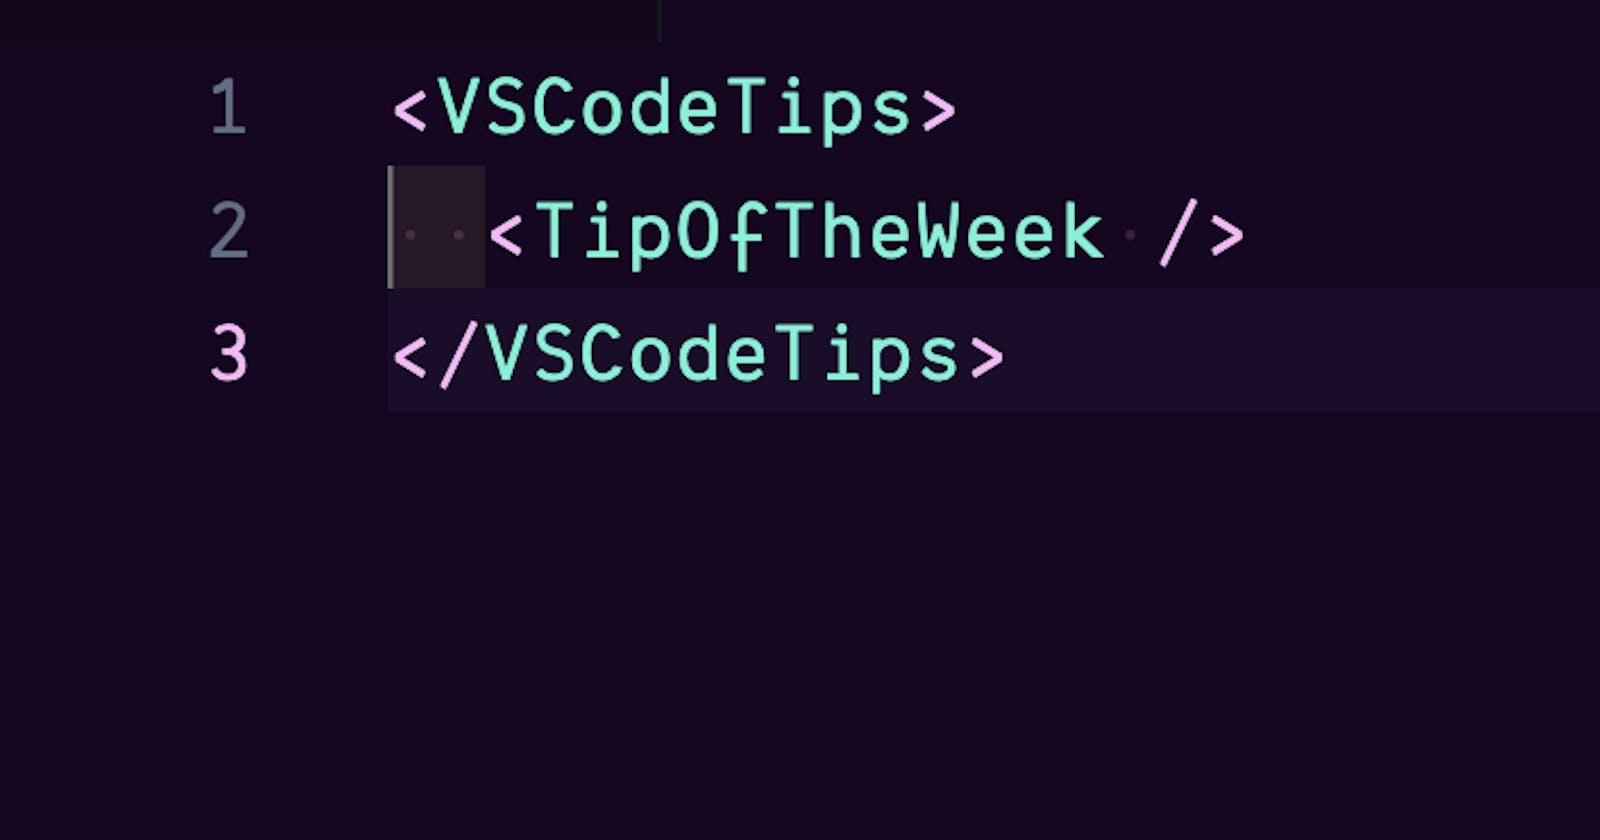 VS Code Tip of the Week: Keyboard Shortcut to Close All Open Tabs